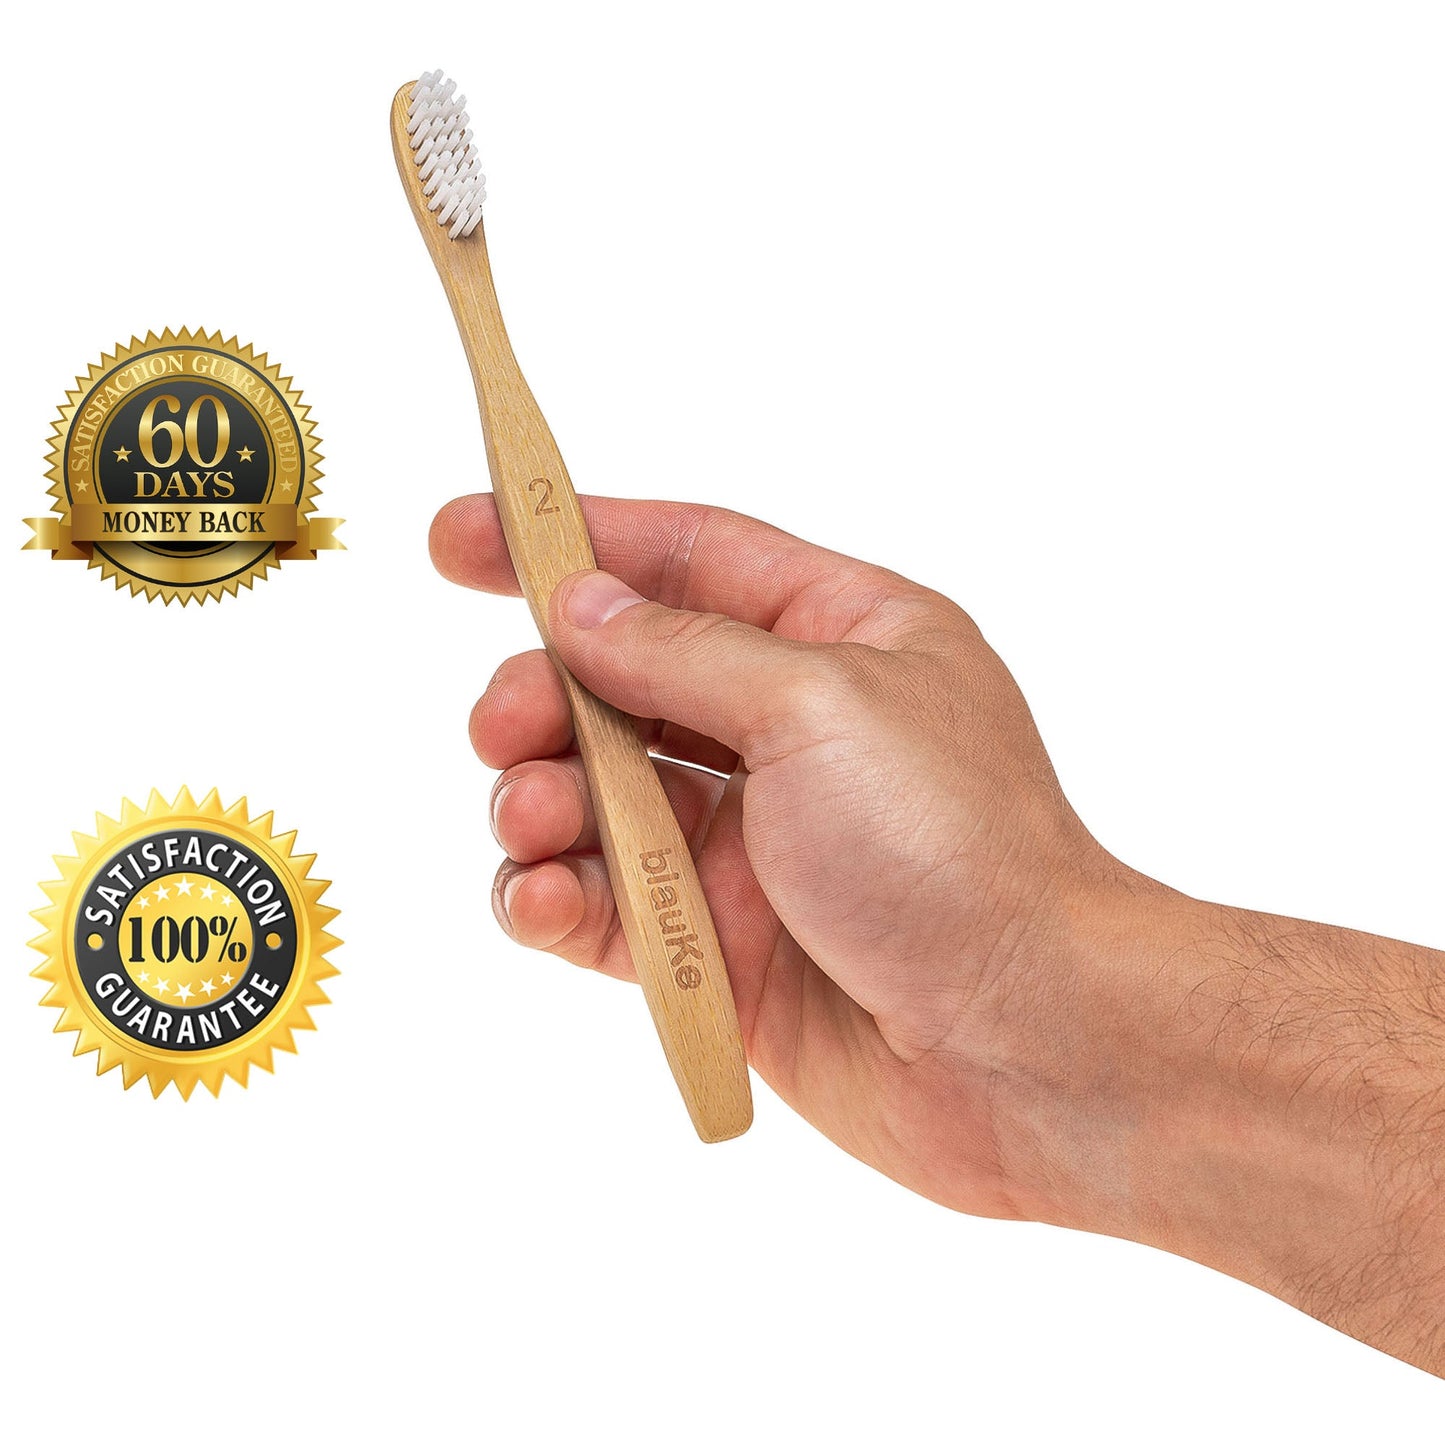 Bamboo Toothbrush Set 4-Pack - Bamboo Toothbrushes with Medium Bristles for Adults - Eco-Friendly, Biodegradable, Natural Wooden Toothbrushes-1